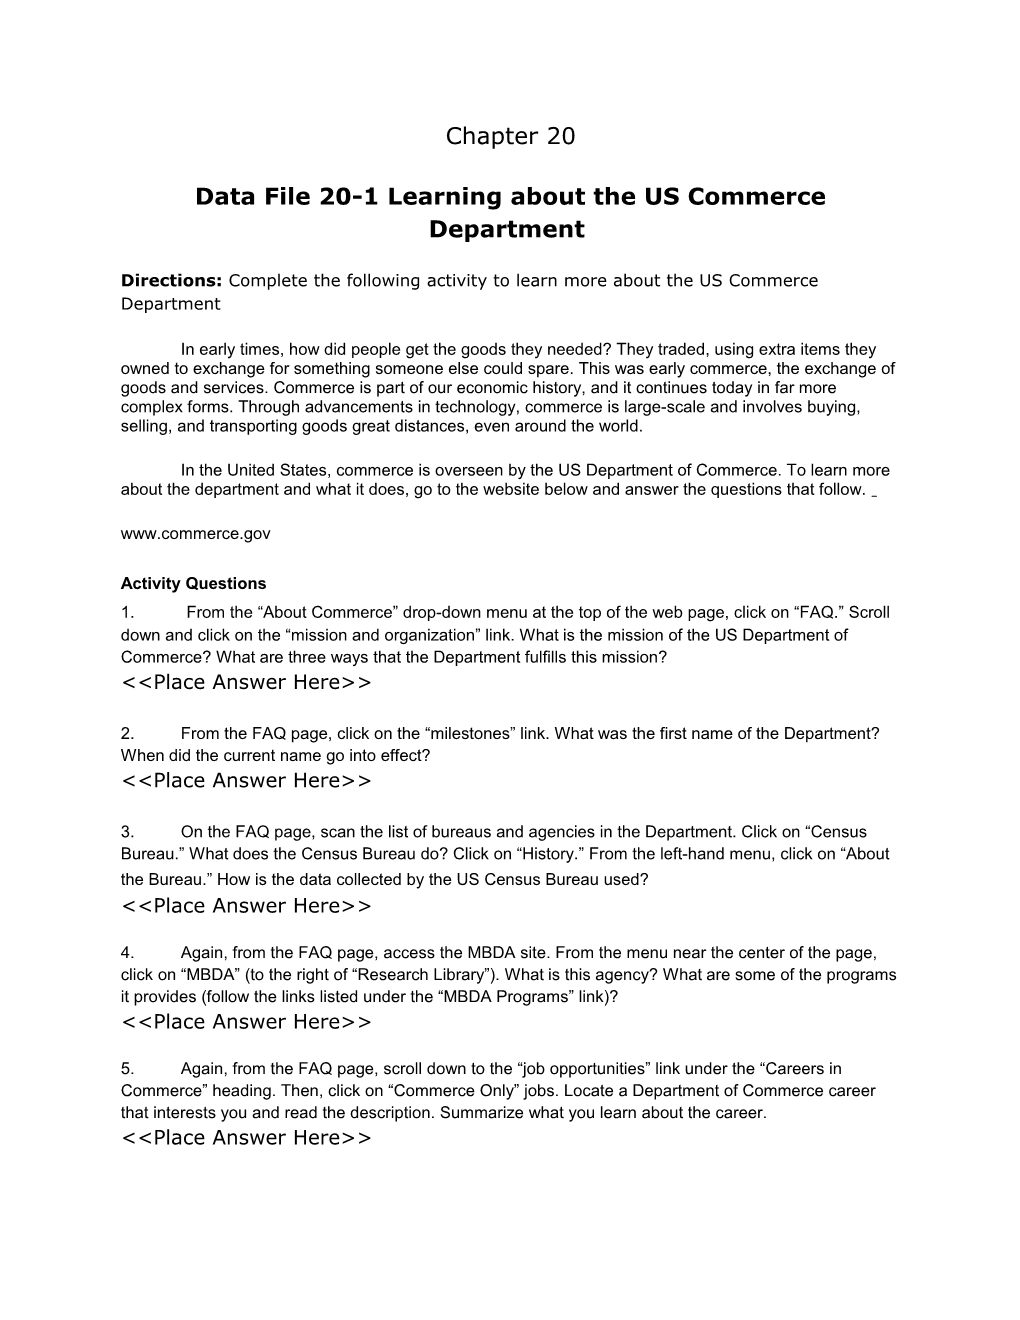 Data File 20-1 Learning About the US Commerce Department